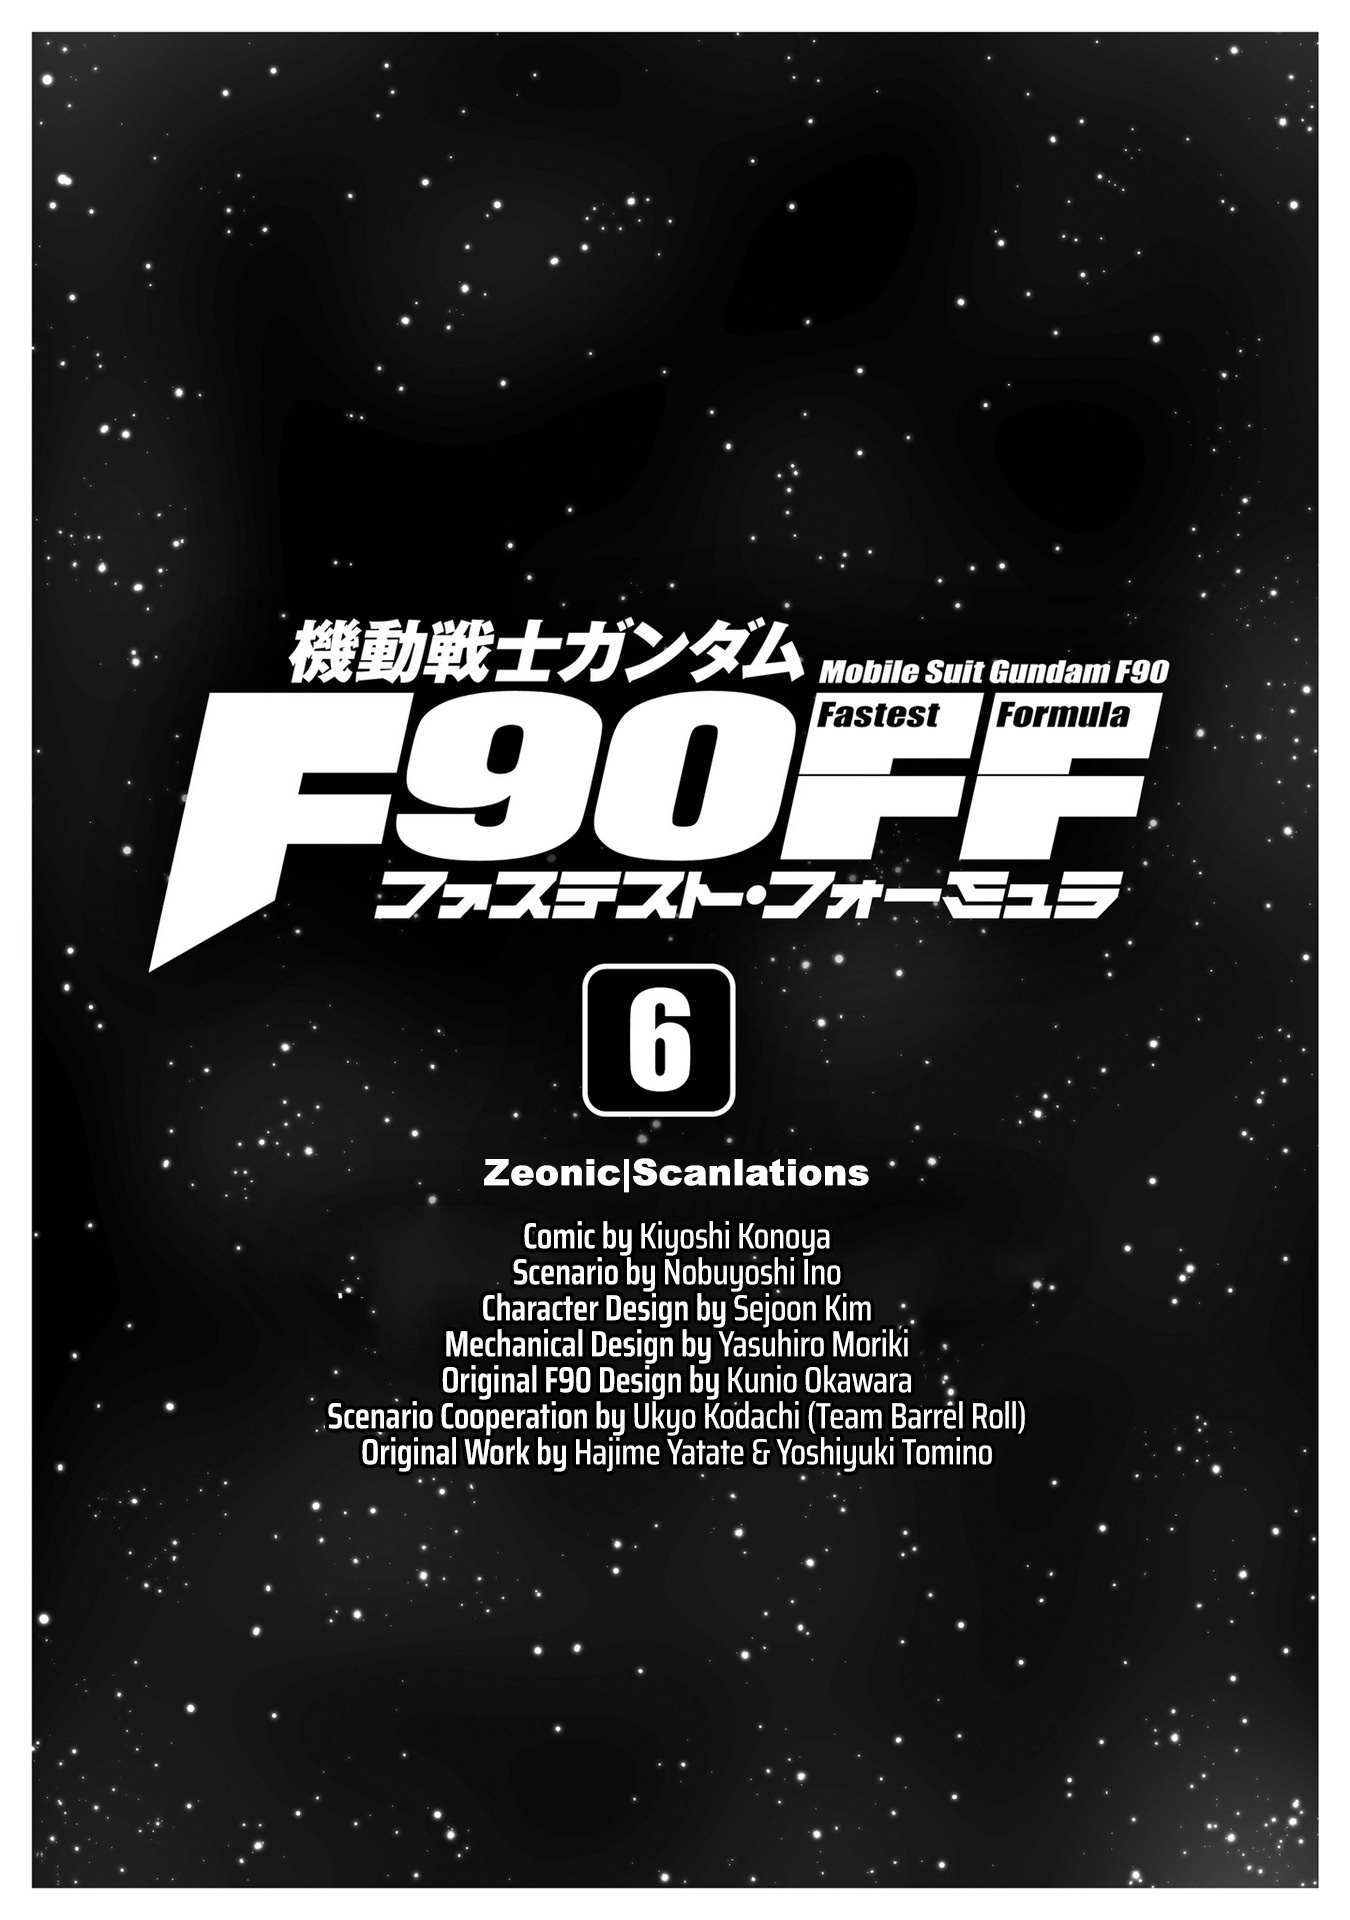 Mobile Suit Gundam F90 FF - chapter 19.5 - #2